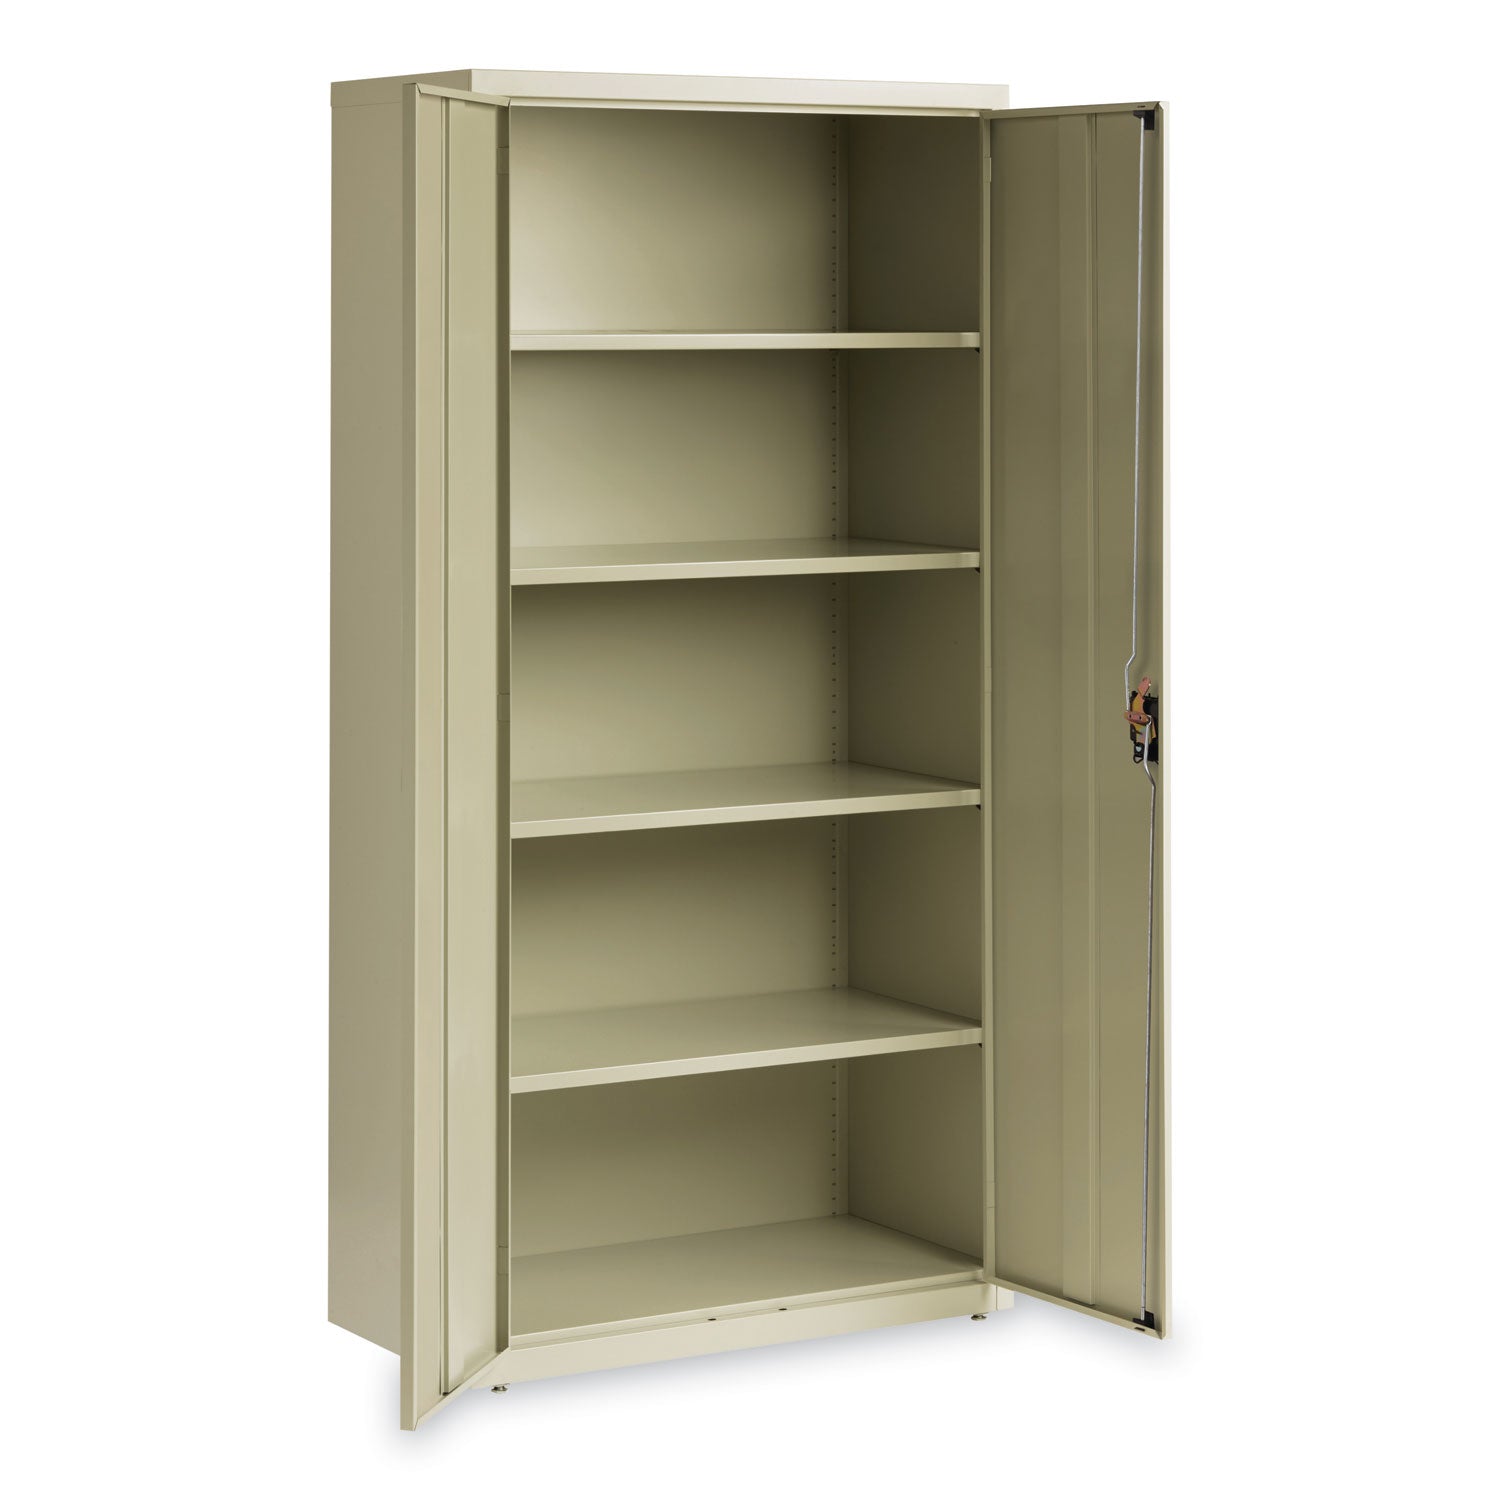 fully-assembled-storage-cabinets-5-shelves-36-x-18-x-72-putty_oifcm7218py - 3